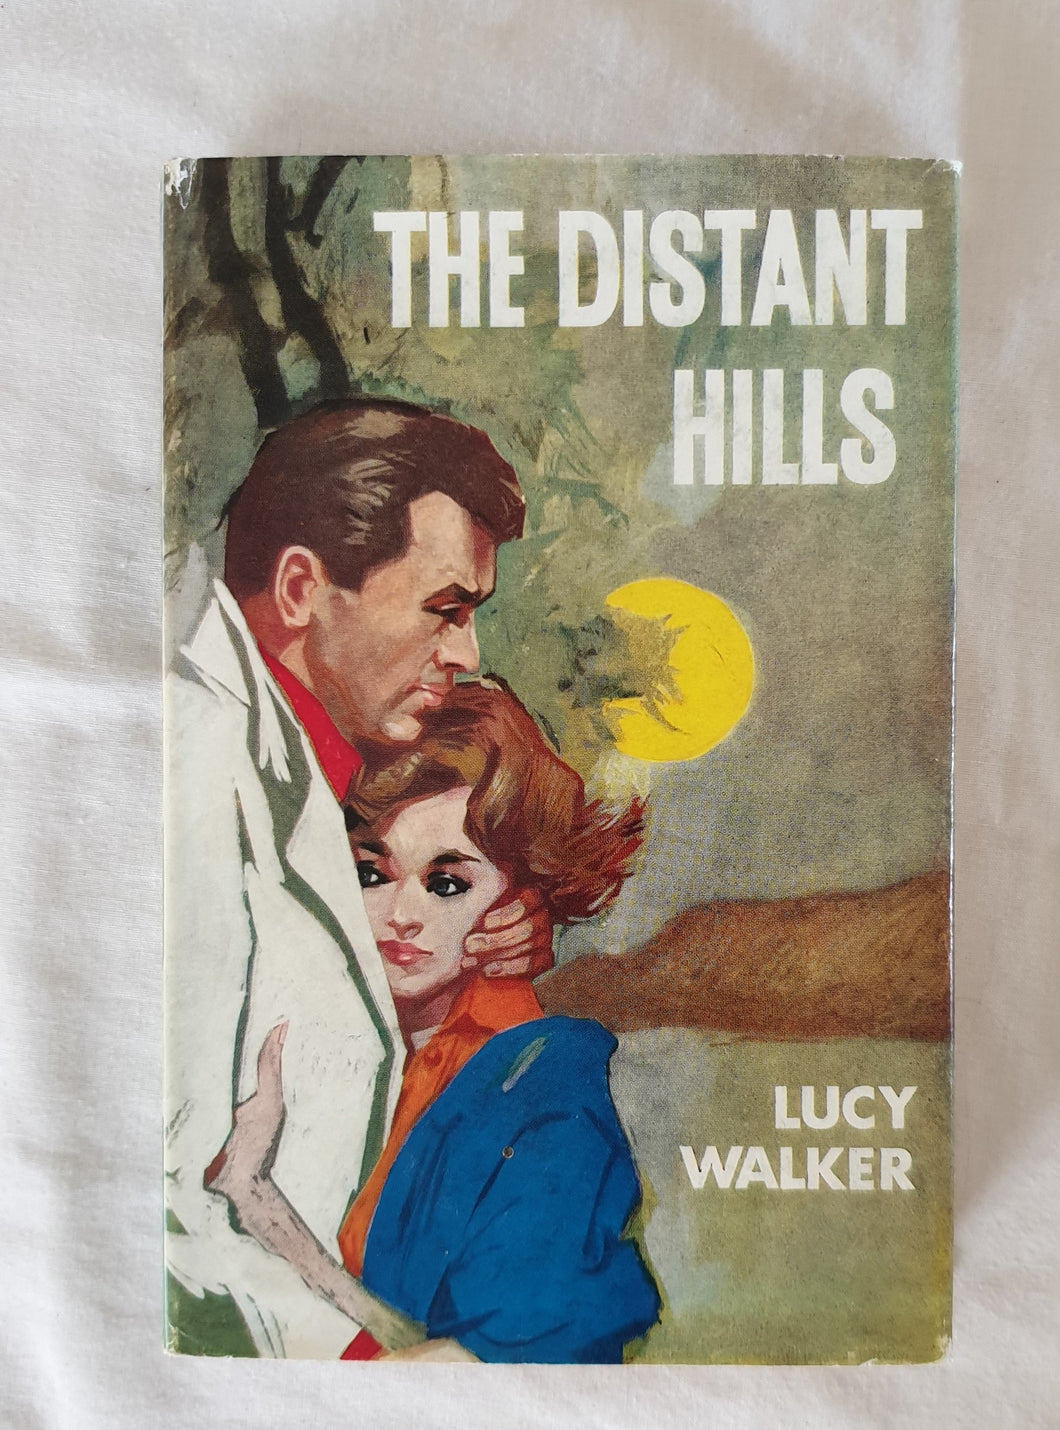 The Distant Hills by Lucy Walker